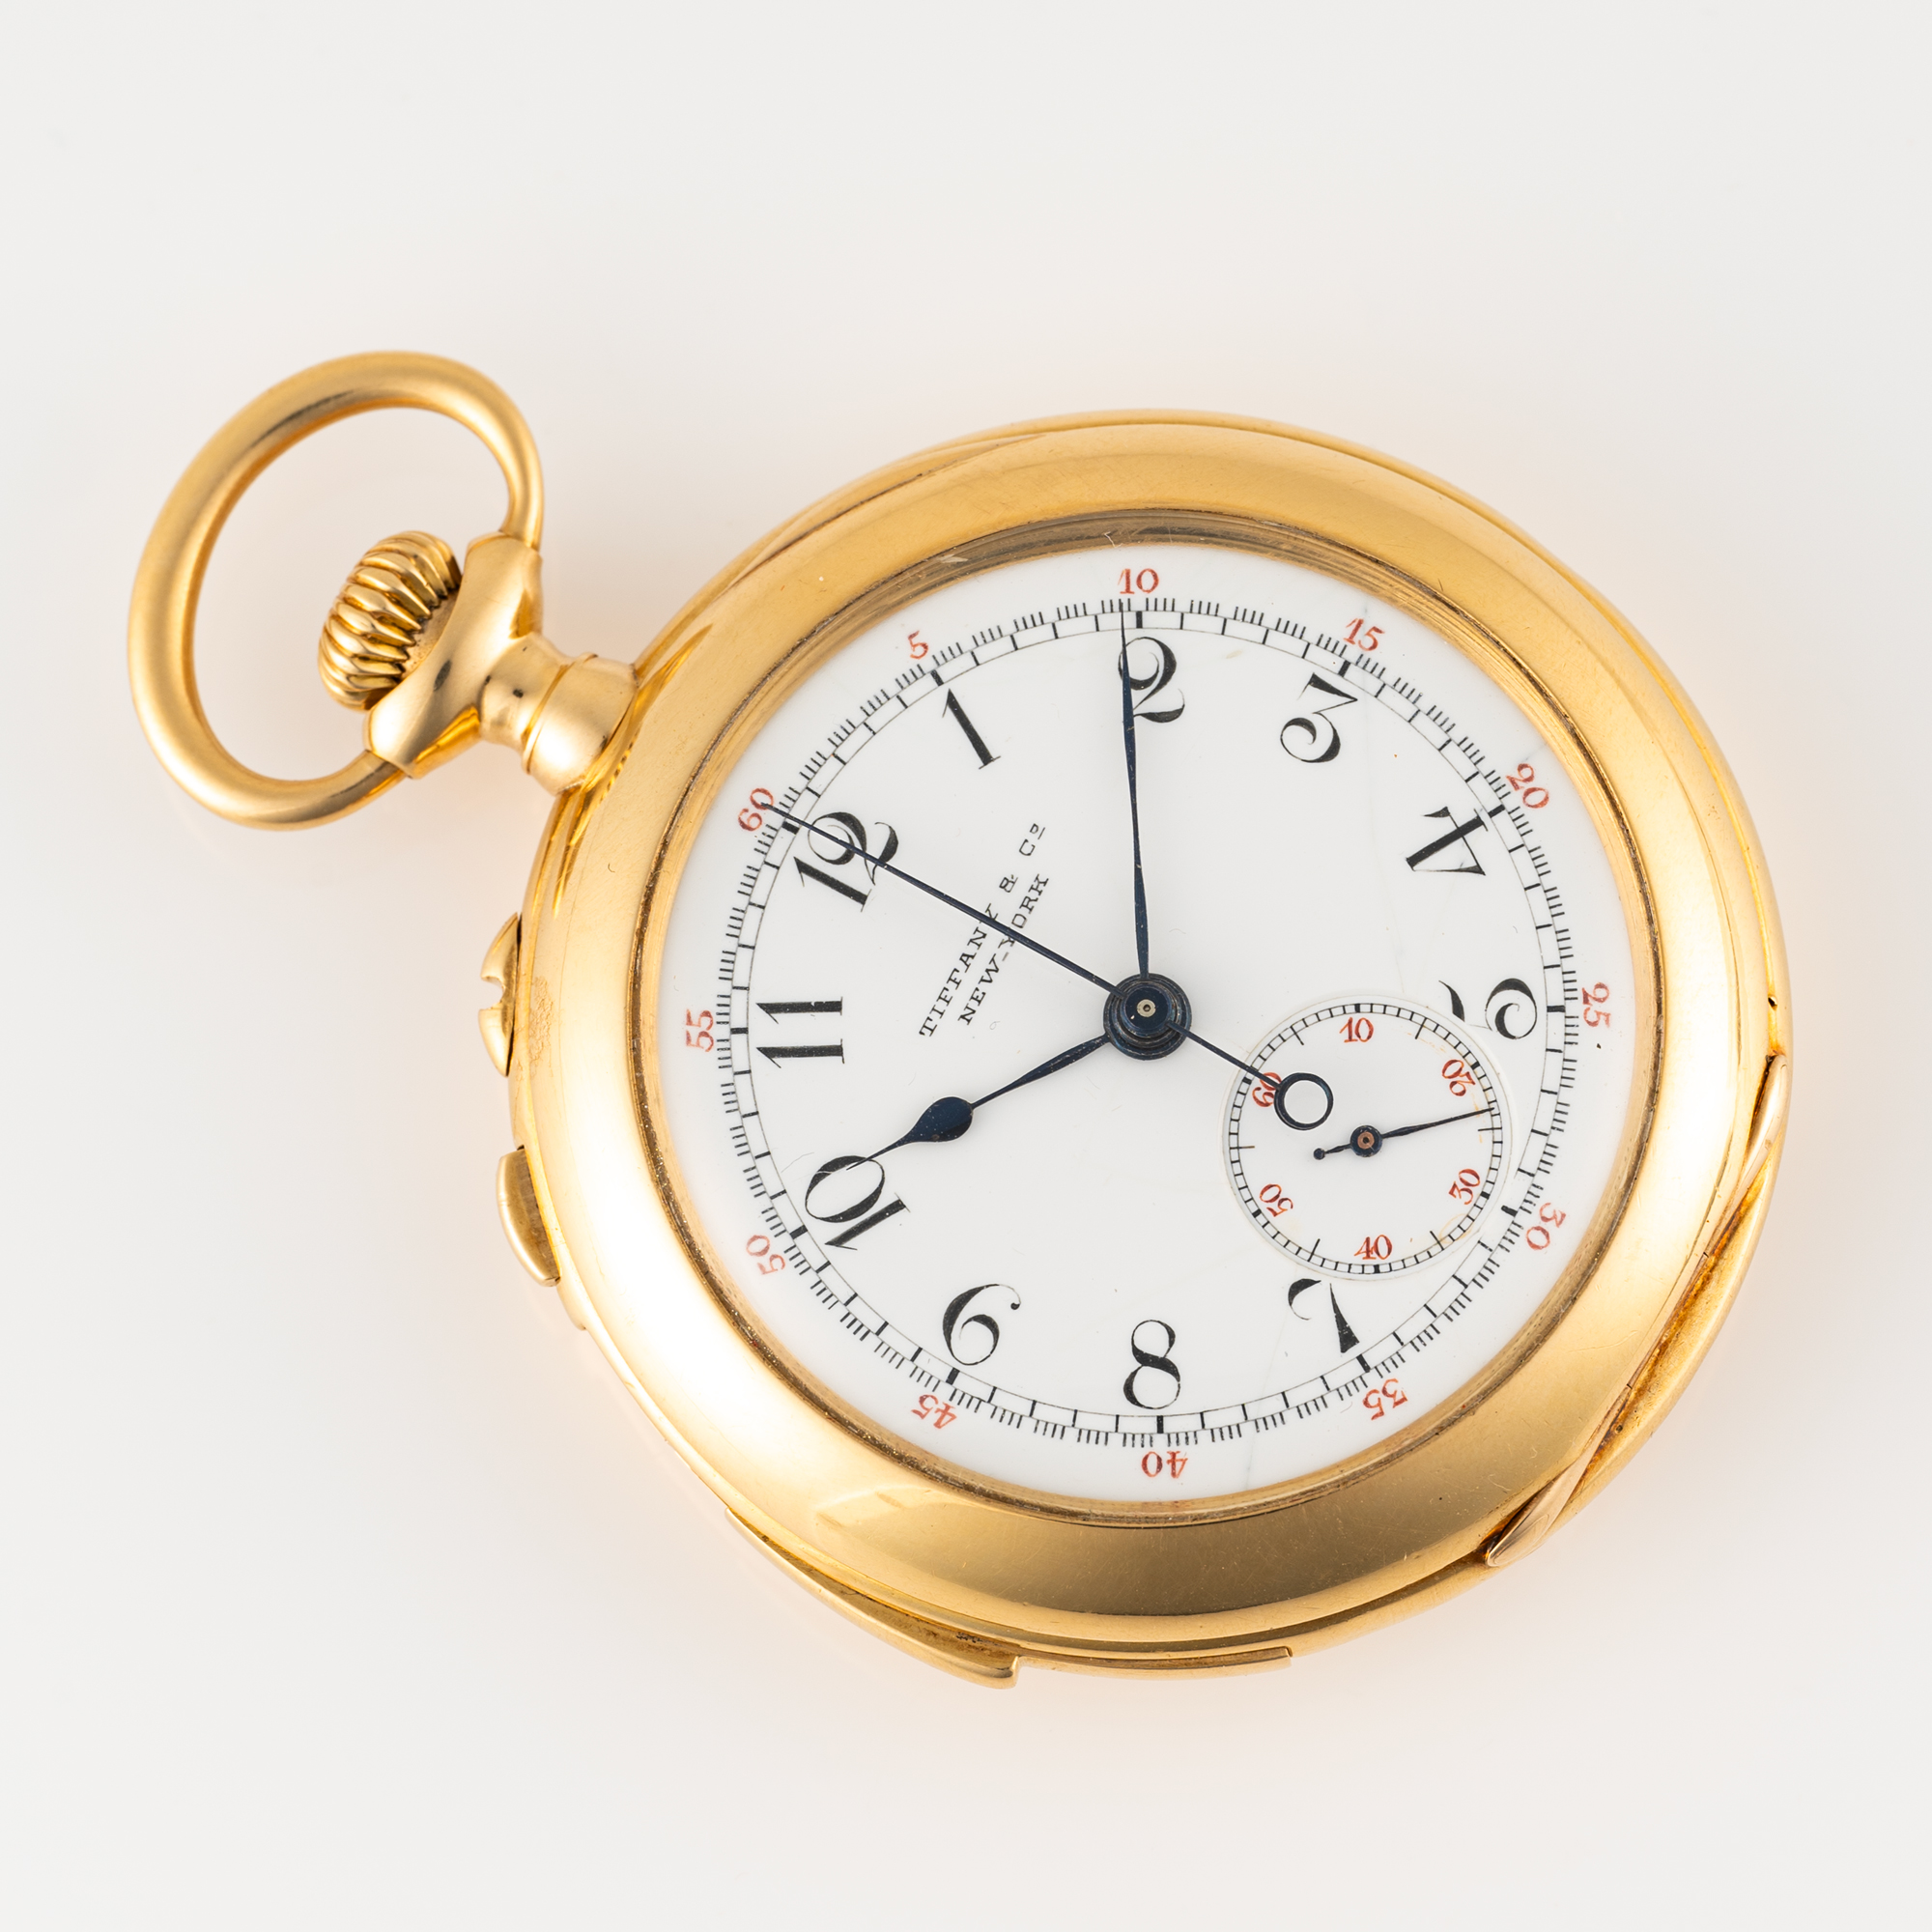 A FINE & RARE GENTLEMAN'S SIZE 18K SOLID GOLD OPEN FACE PATEK PHILIPPE FIVE MINUTE REPEATER SPLIT - Image 4 of 11